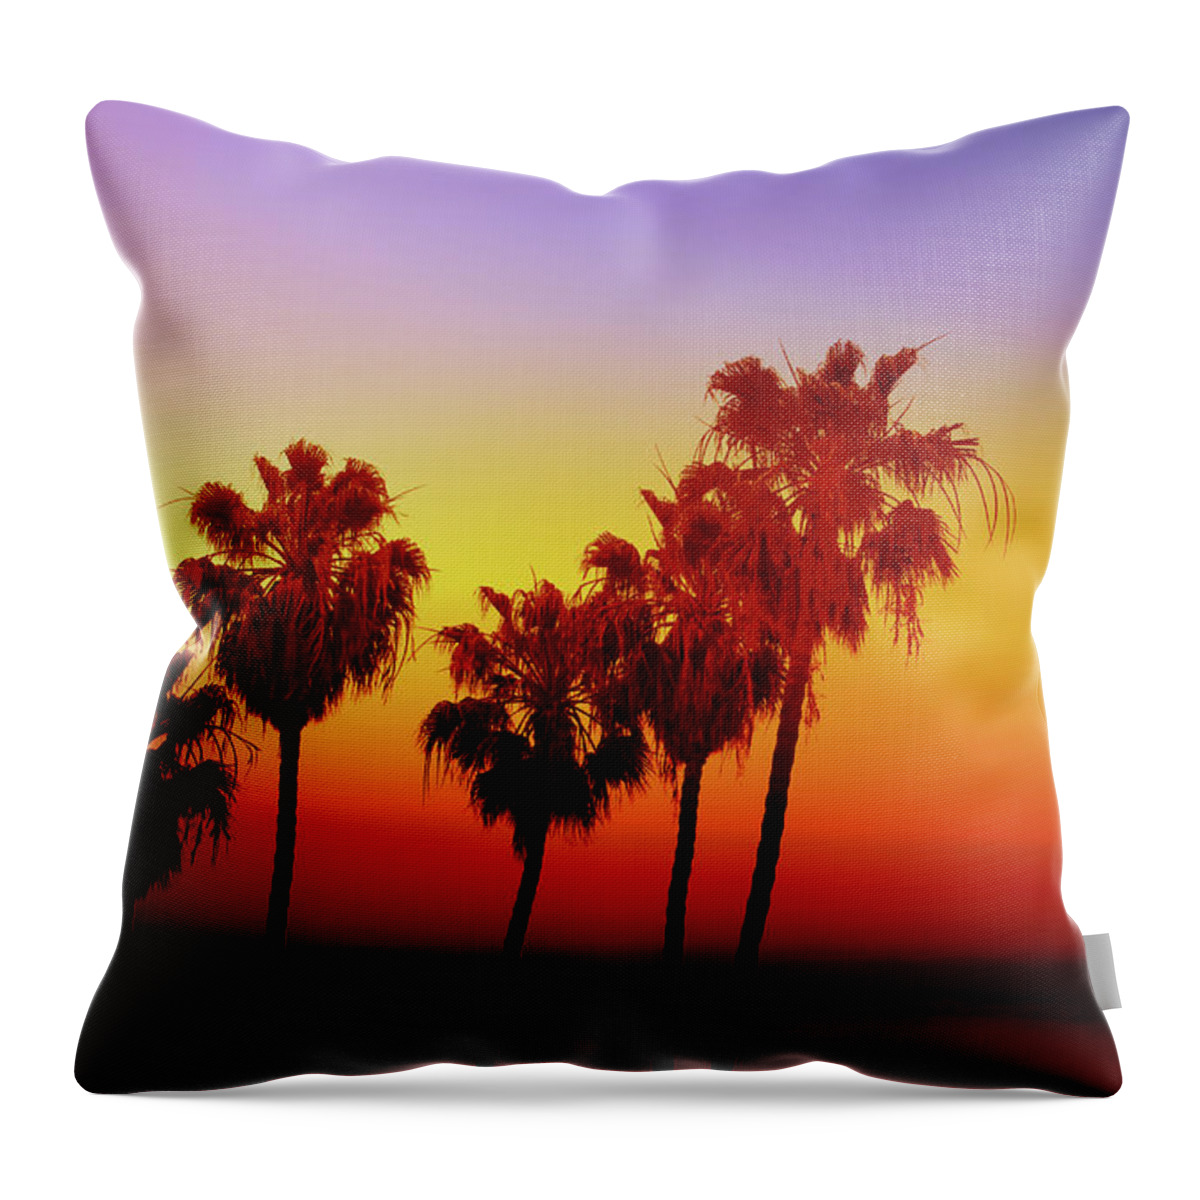 Palm Trees Throw Pillow featuring the photograph Sunset Palm Trees- Art by Linda Woods by Linda Woods